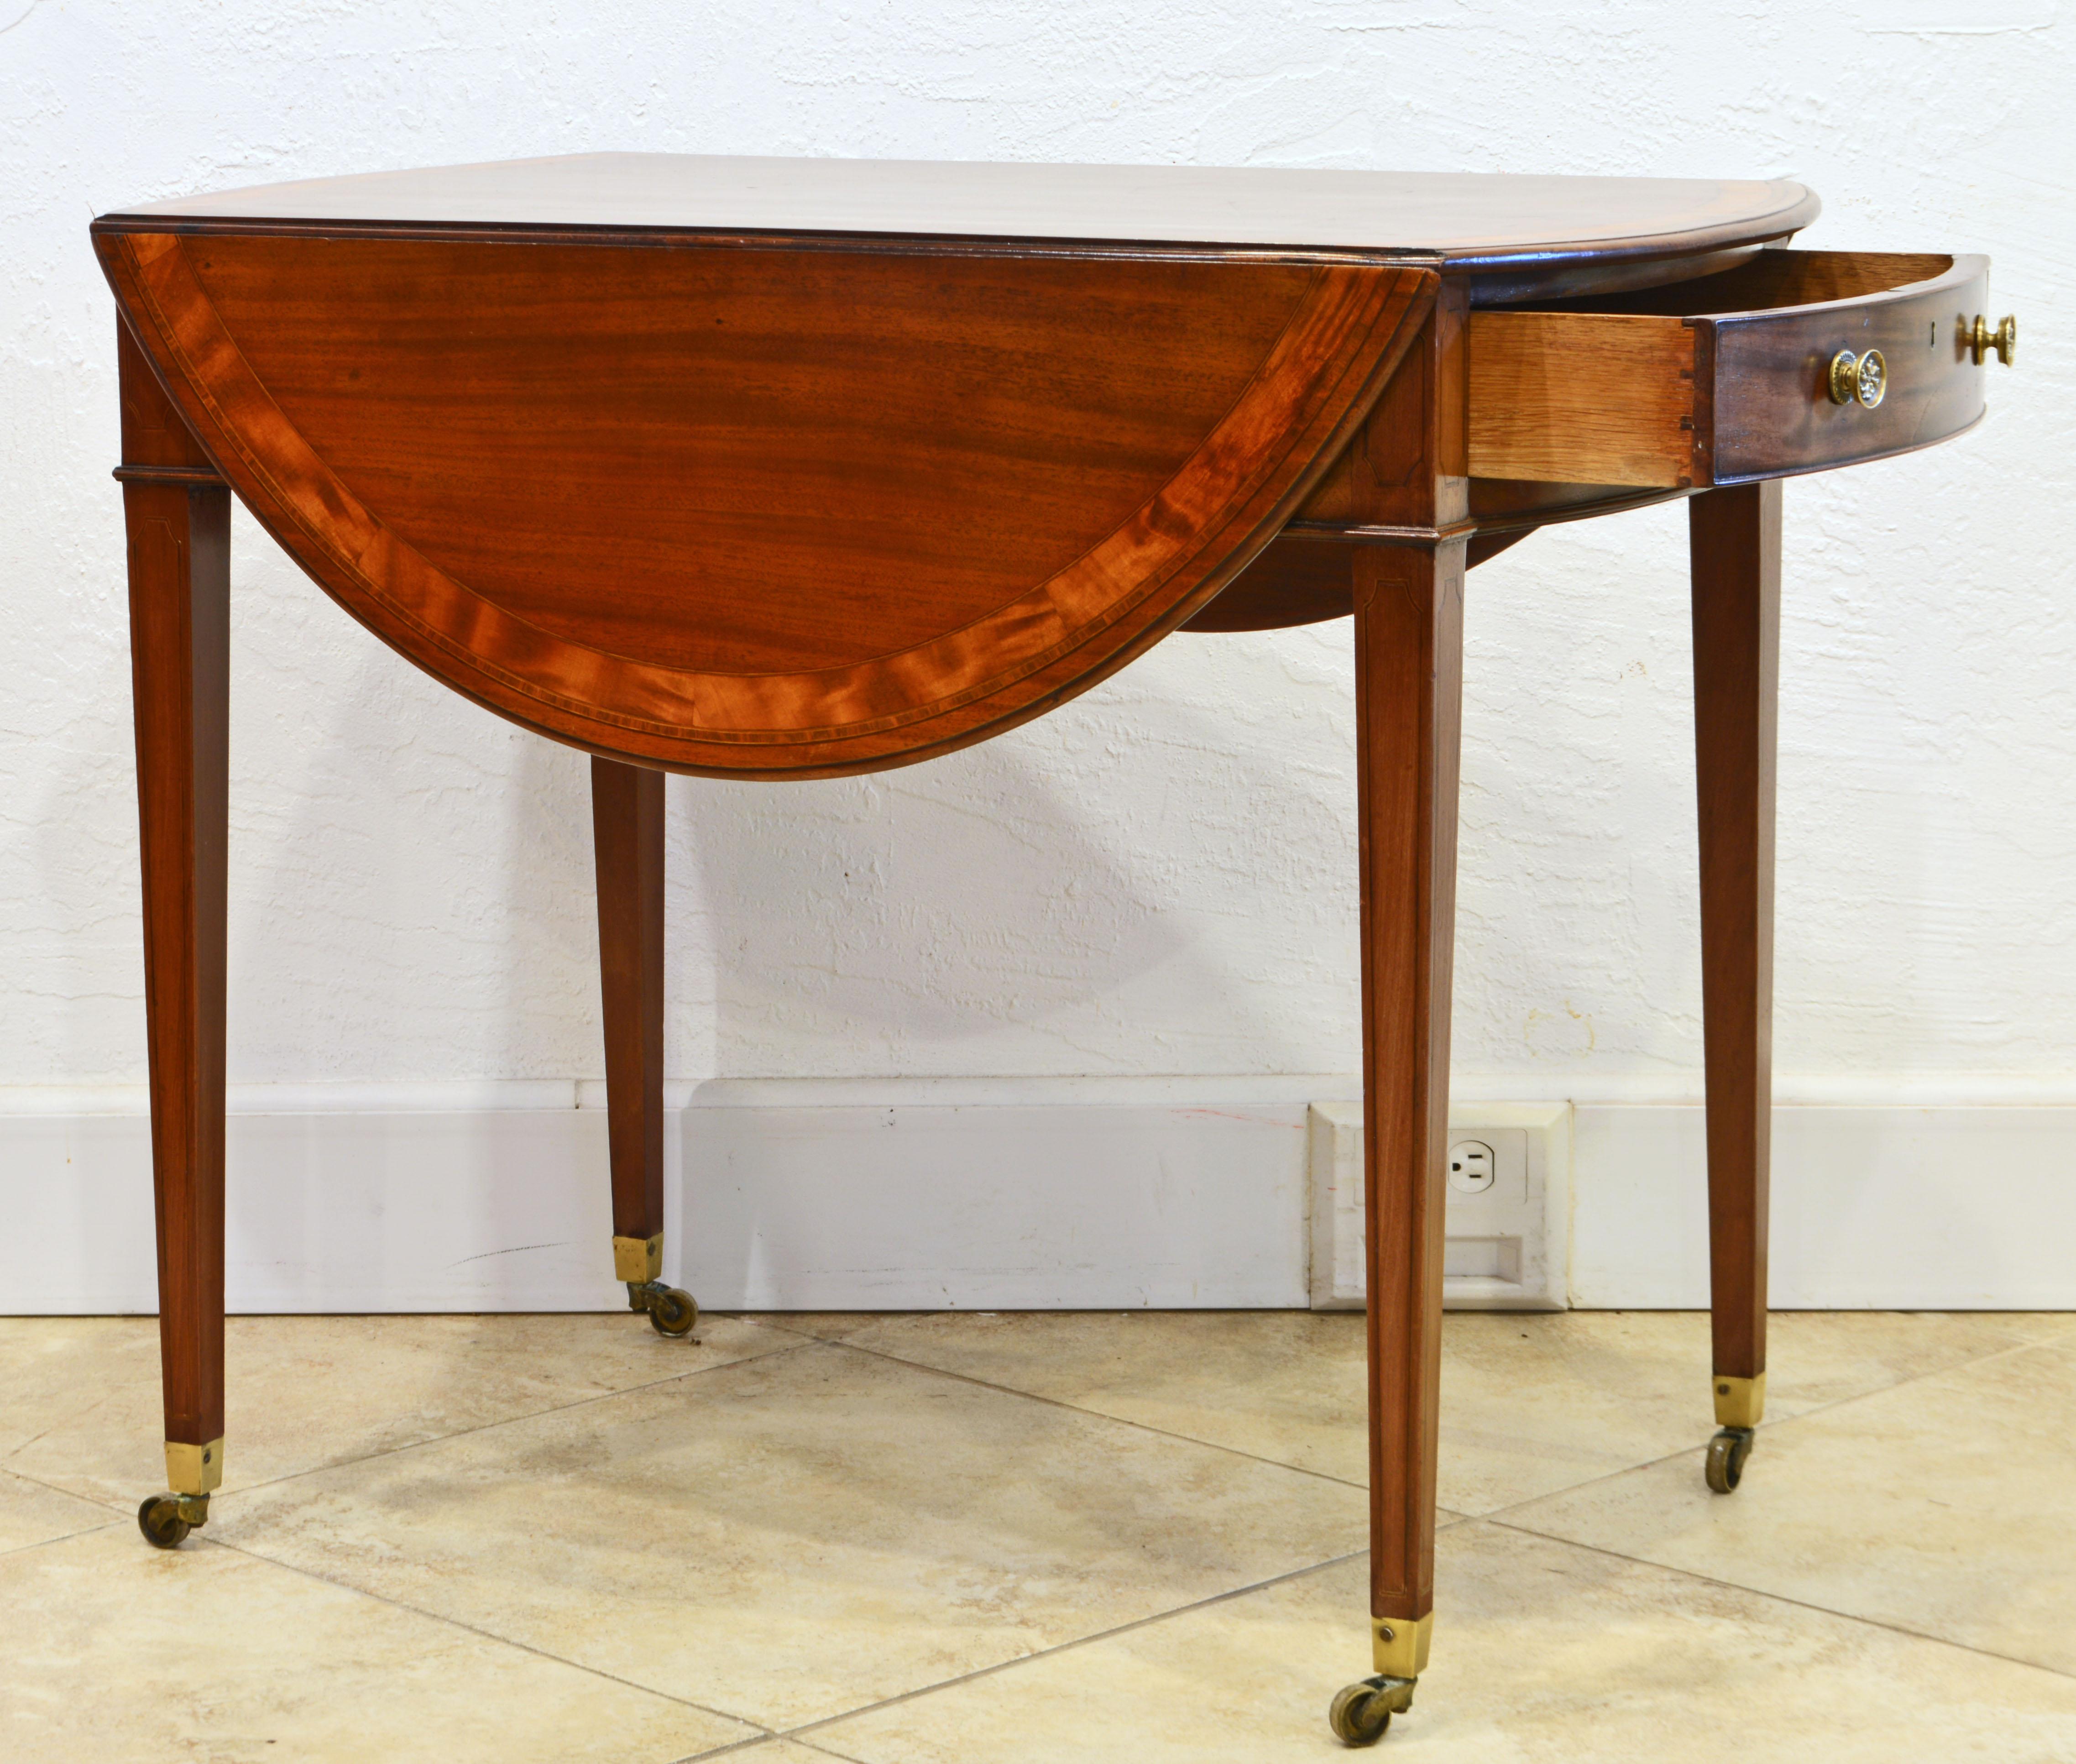 This distinguished George III inlaid and banded mahogany Pembroke table has drop leaves on both sides opening up to a very useful oval shape table. The drawer has one drawer and a meticulously simulated drawer front on the opposite end. The table